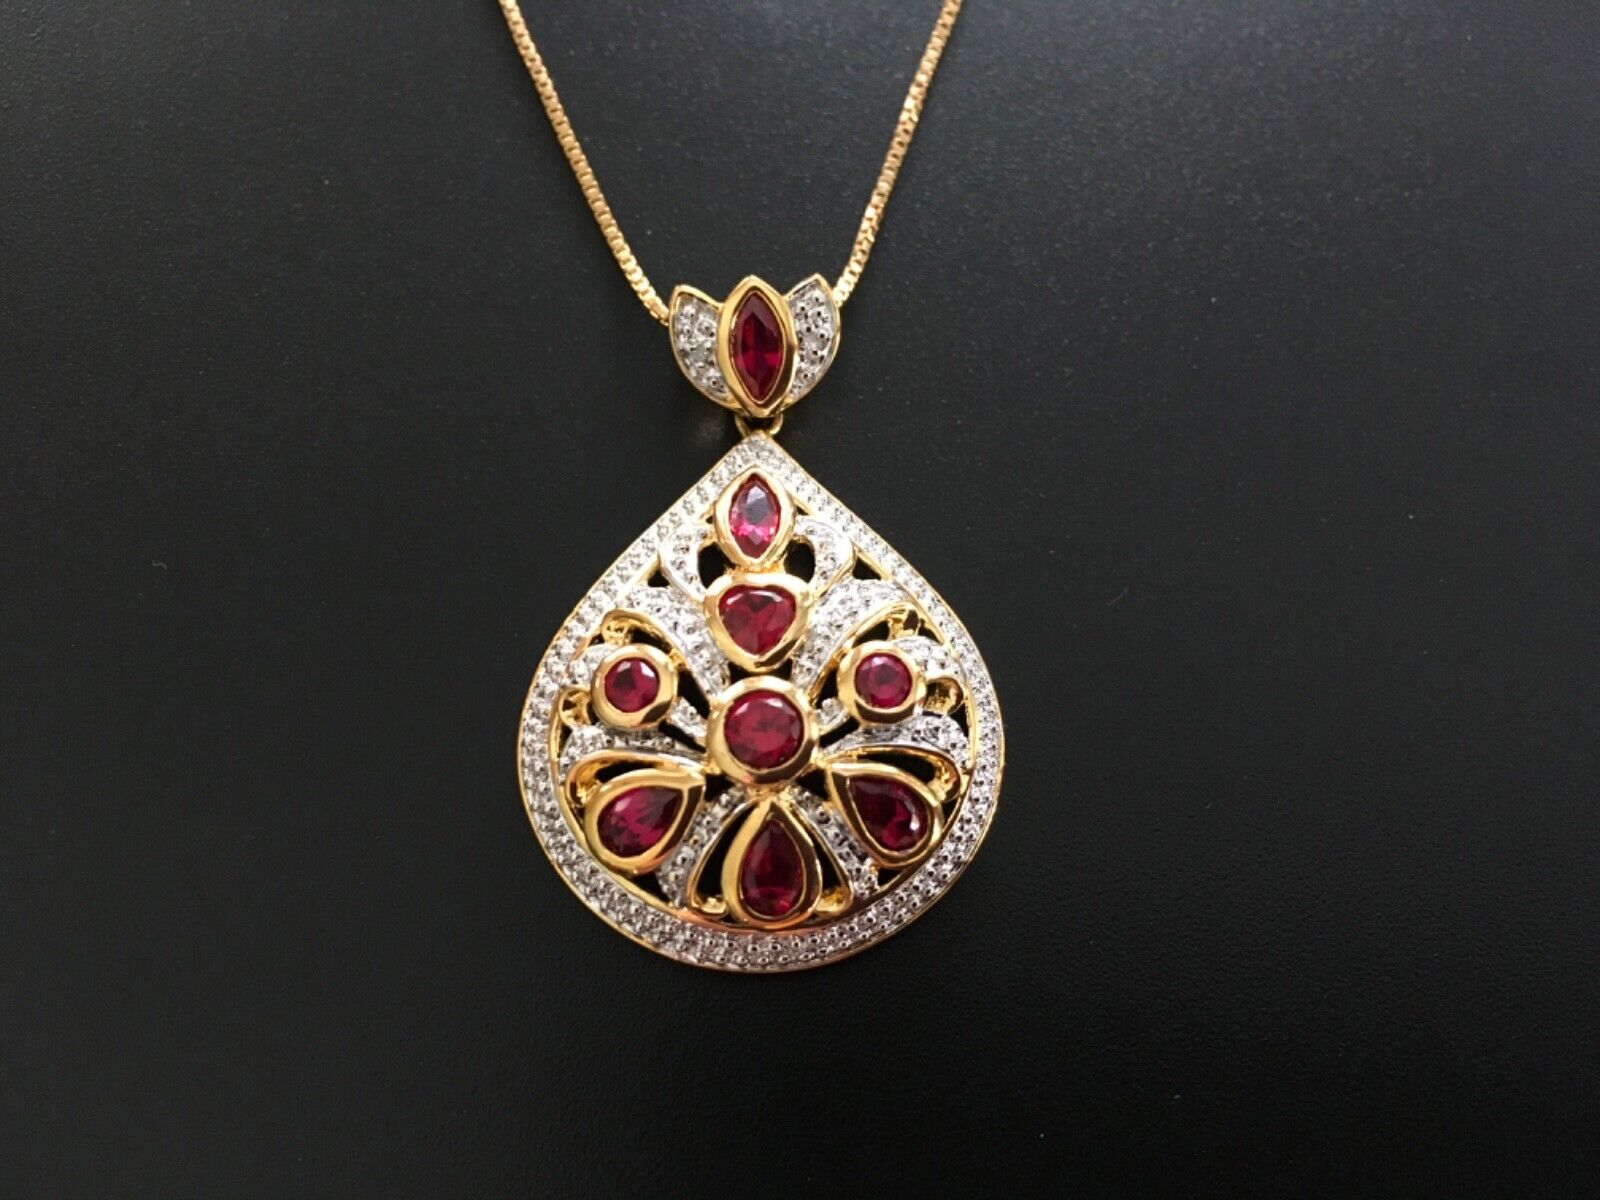 Beautiful Vintage Lavalier Red Rhinestone Pendant on a Sterling Silver Necklace